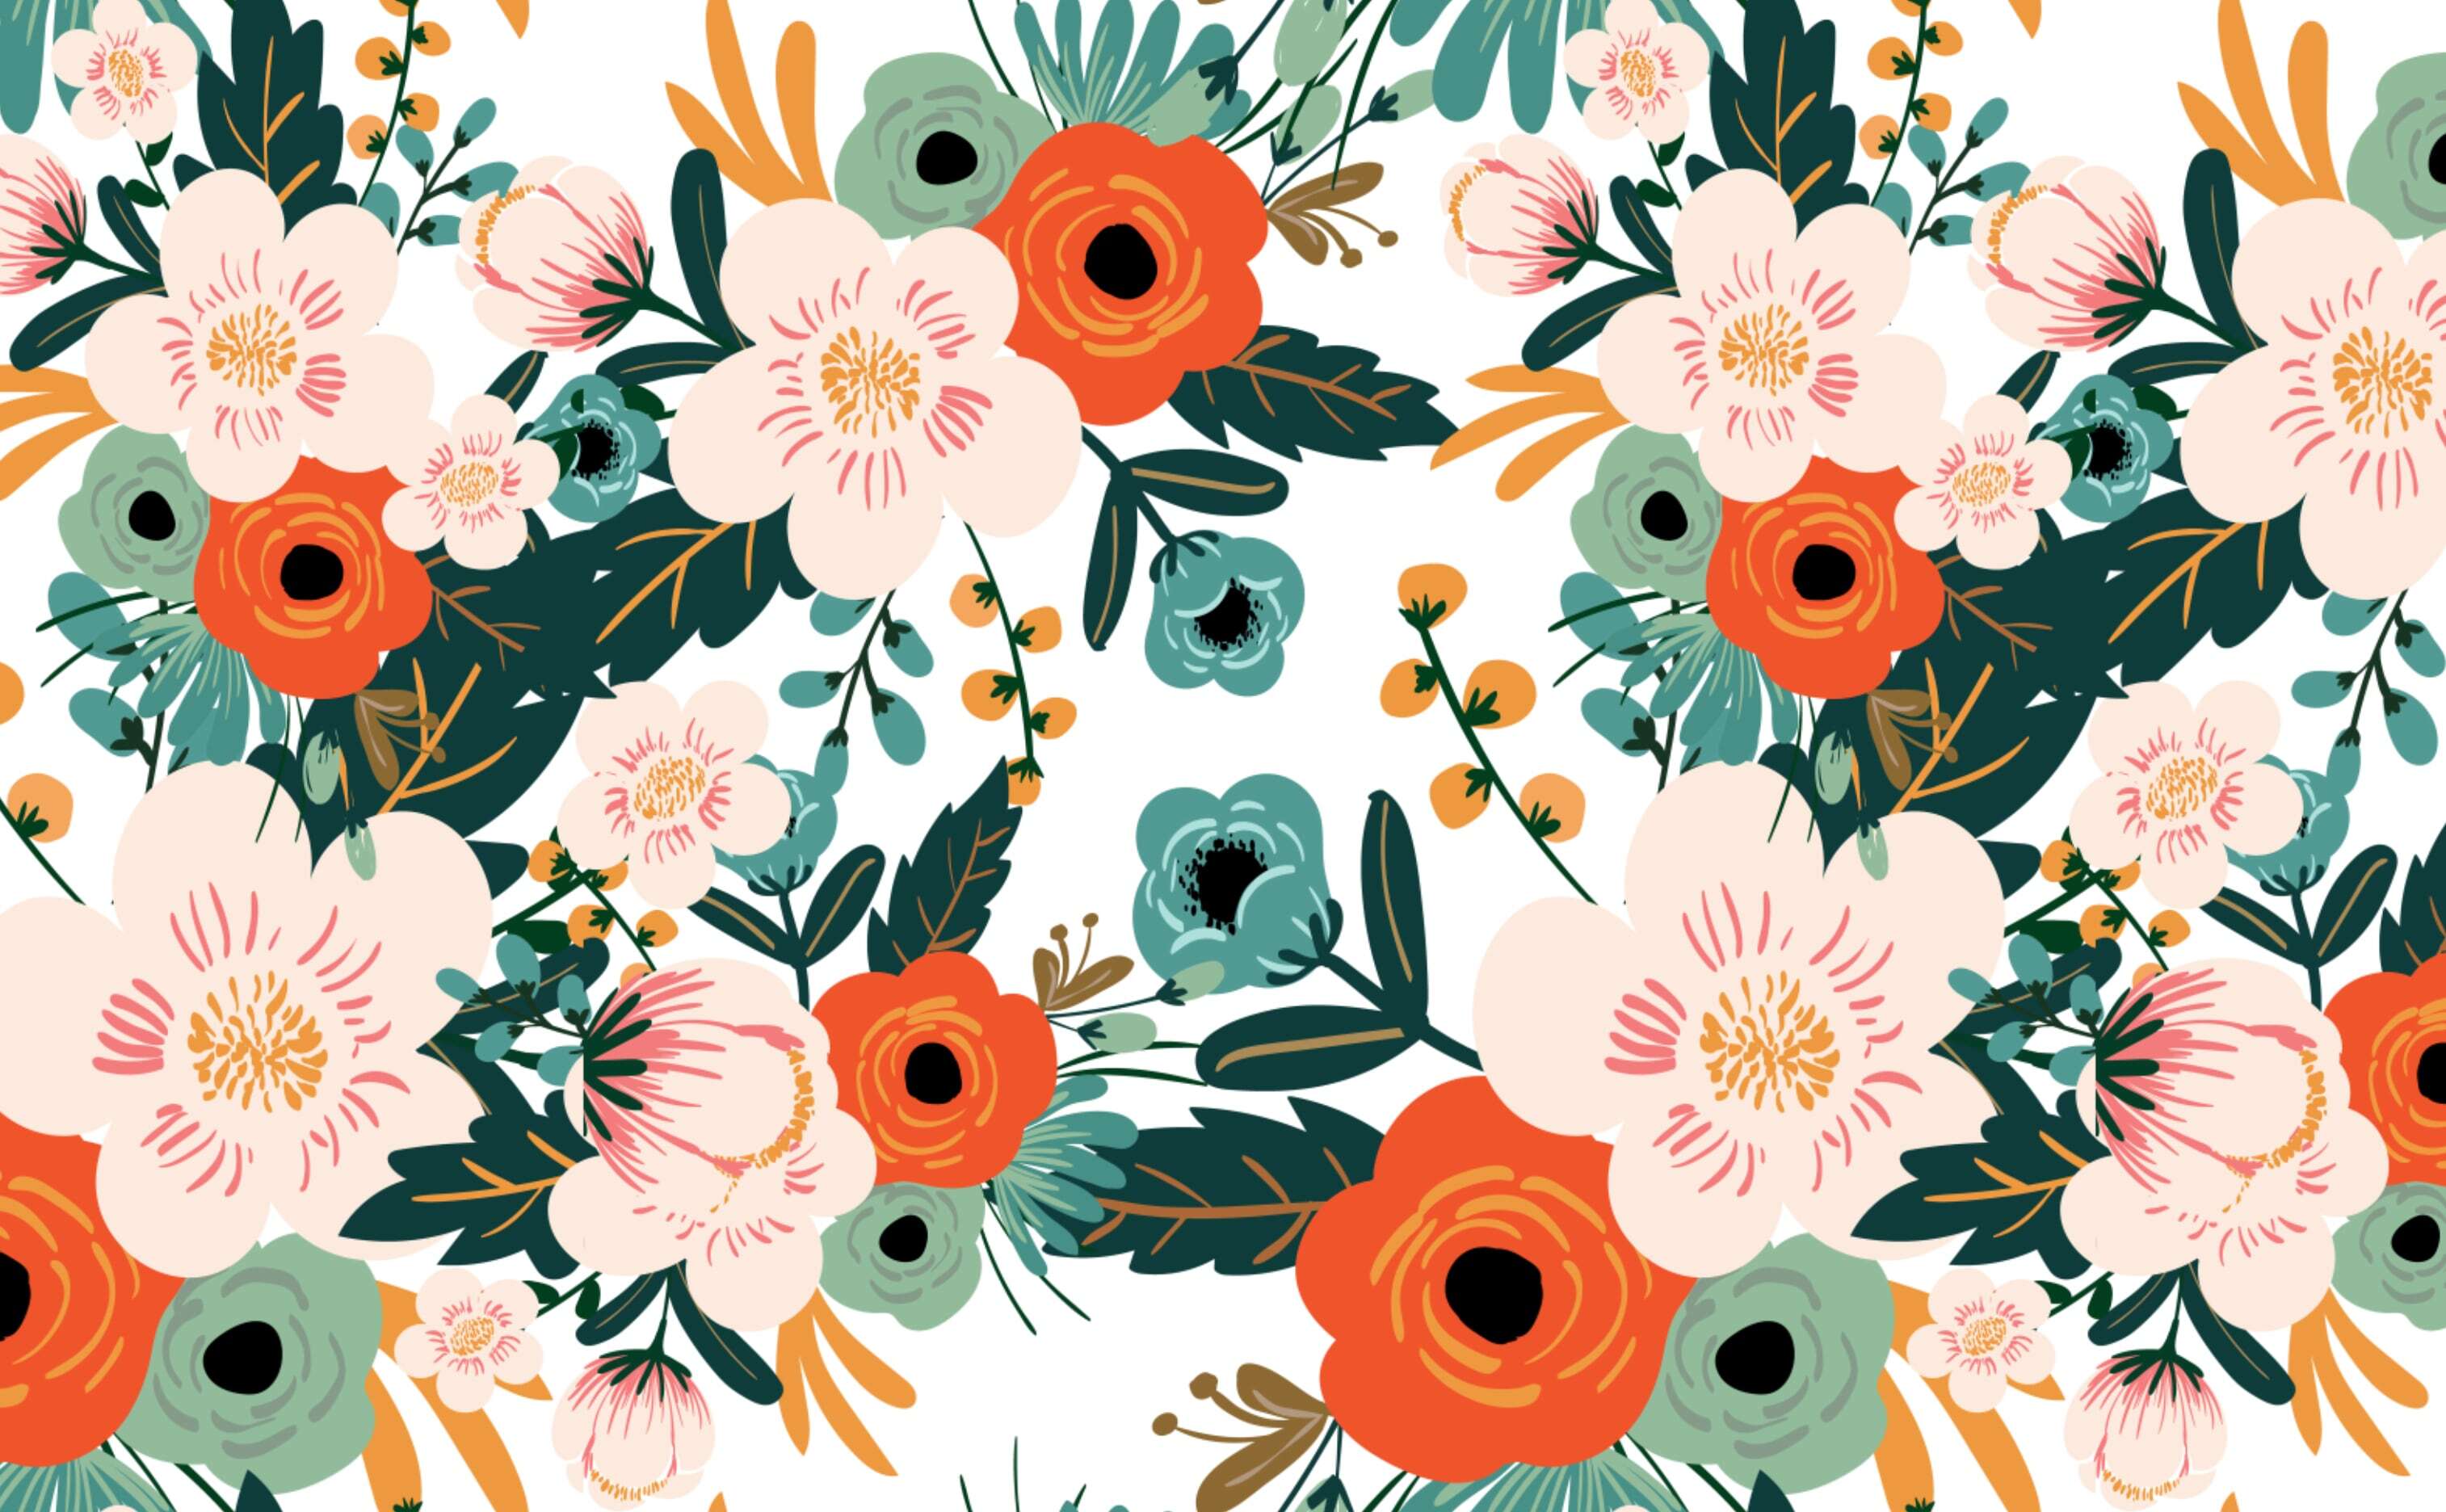 A floral pattern with orange and green flowers - Bright